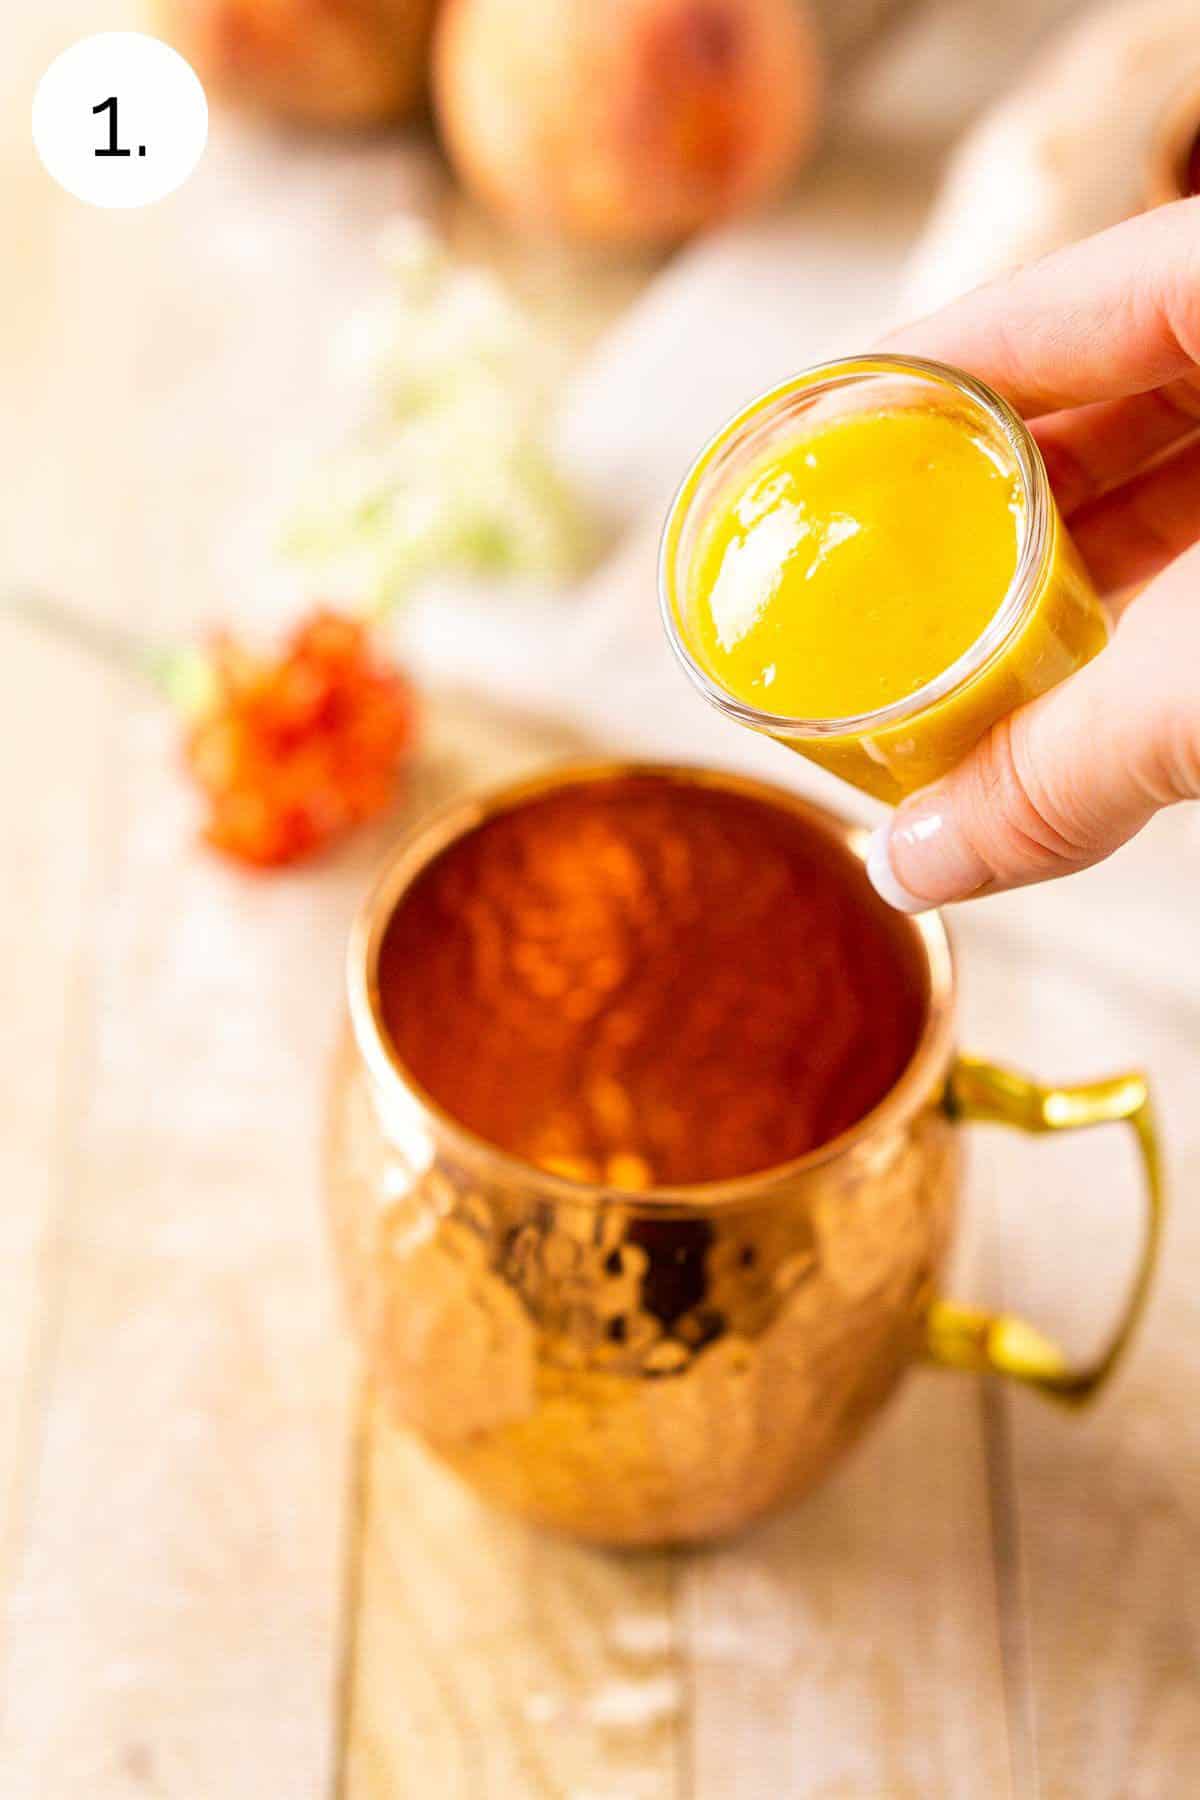 A hand pouring the peach purée into a copper mug on a cream-colored wooden board.